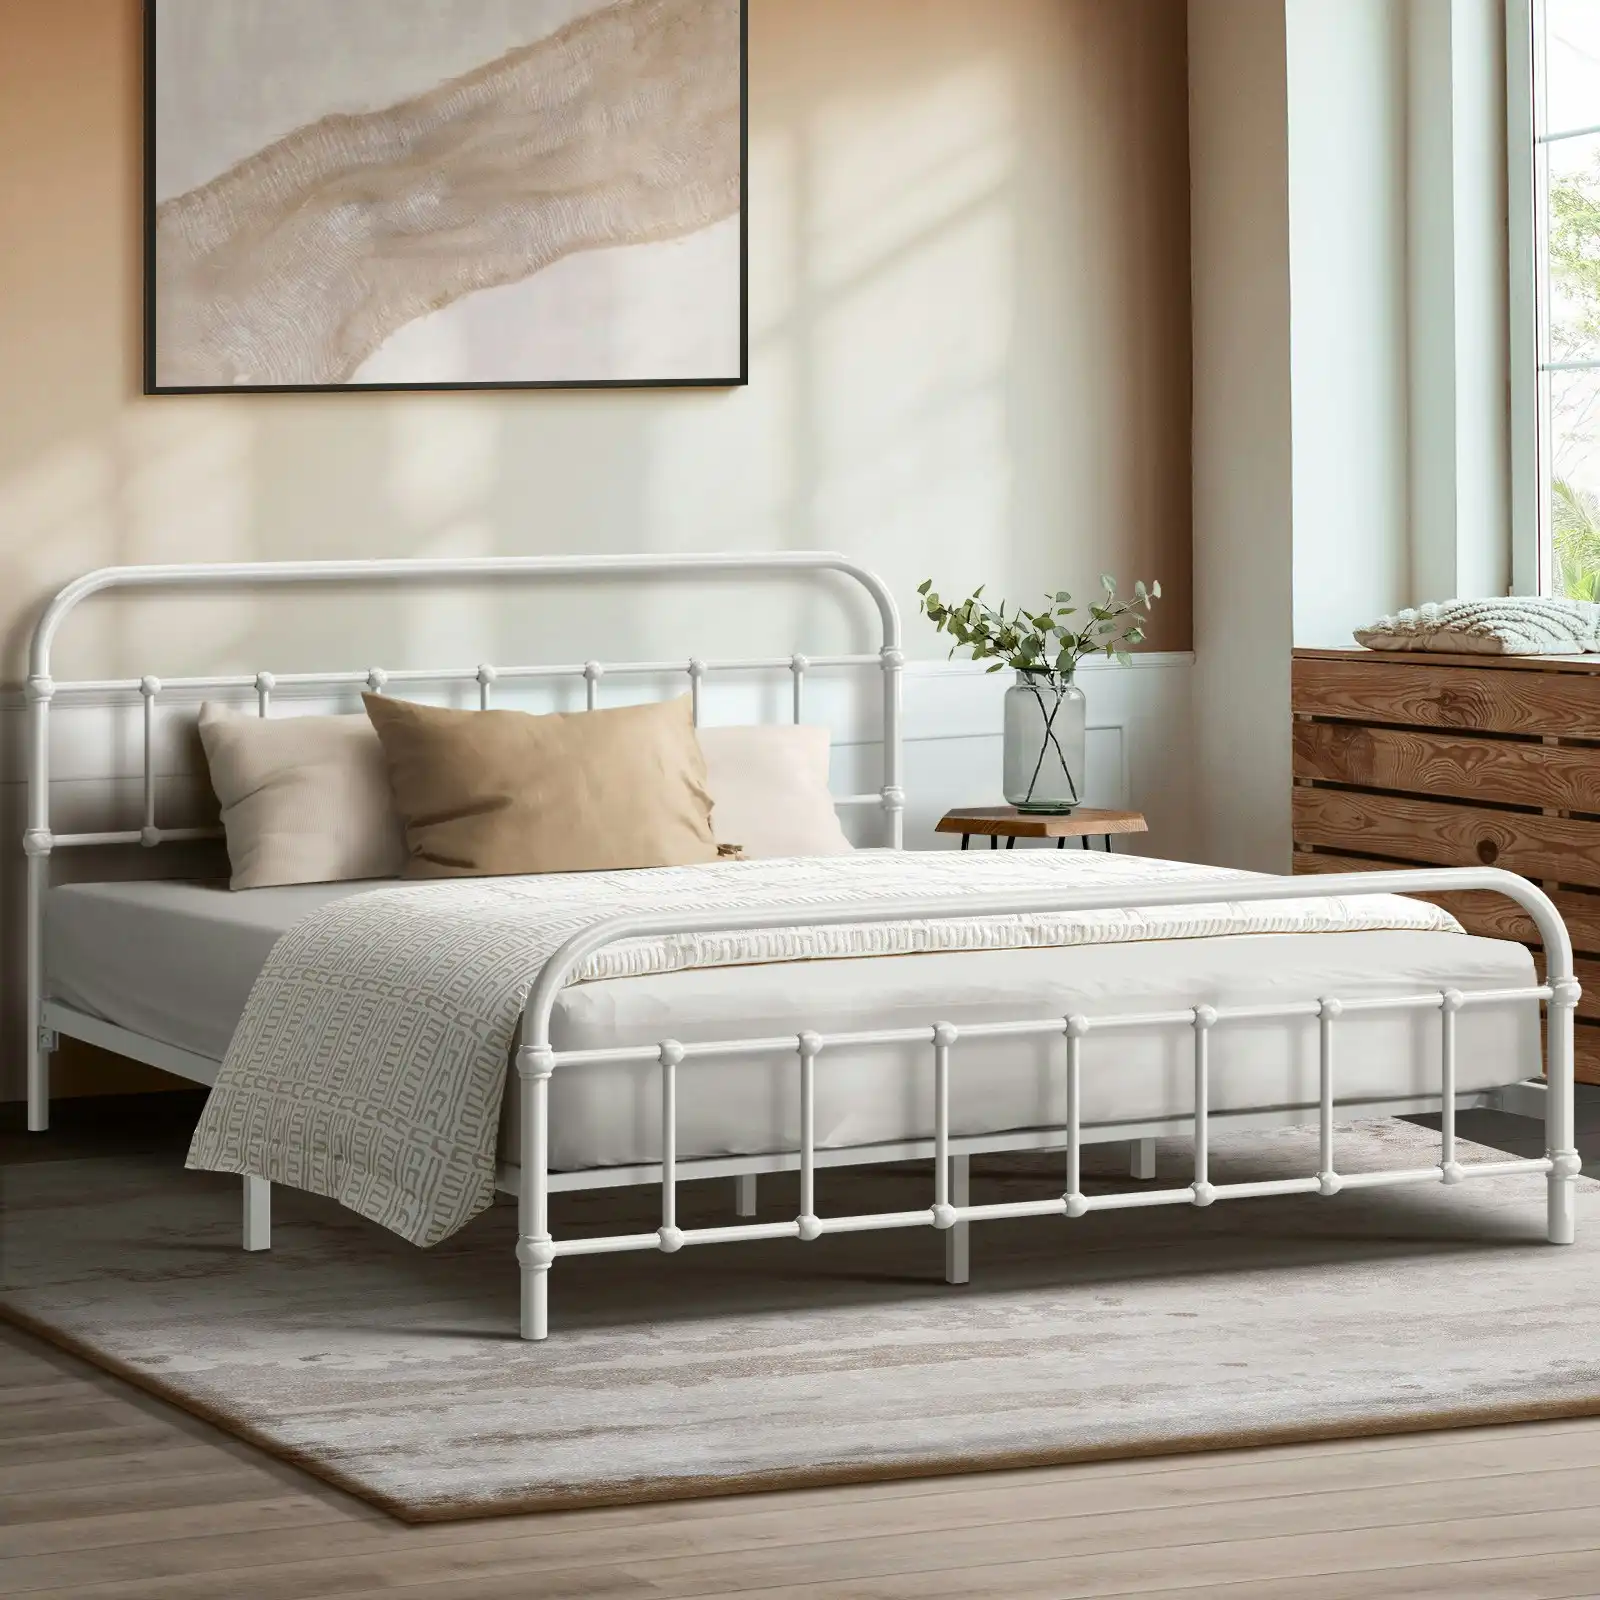 Oikiture Bed Frame Metal Bed Base Double Size Bed Platform White